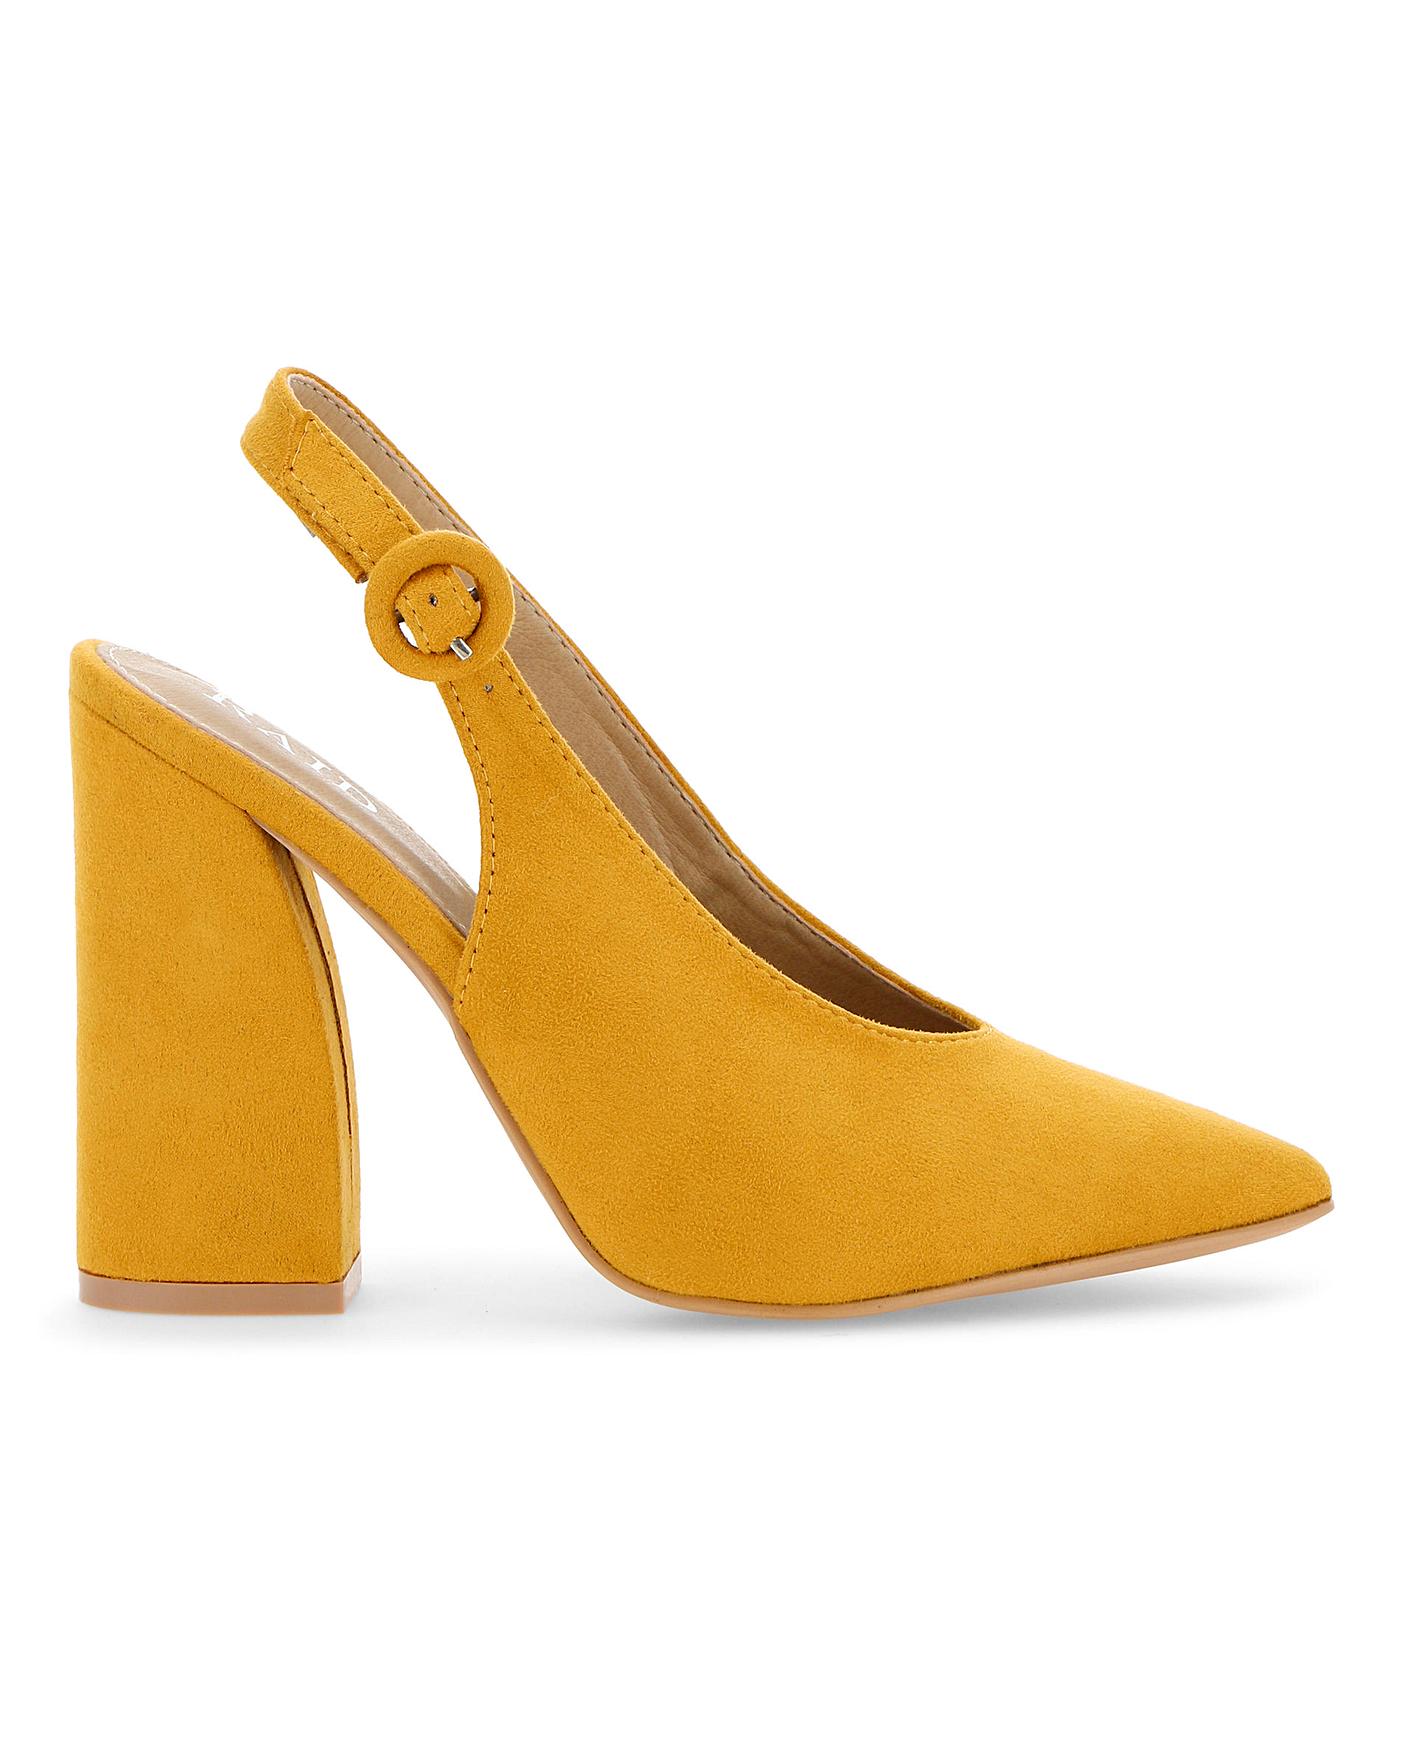 yellow sling back shoes